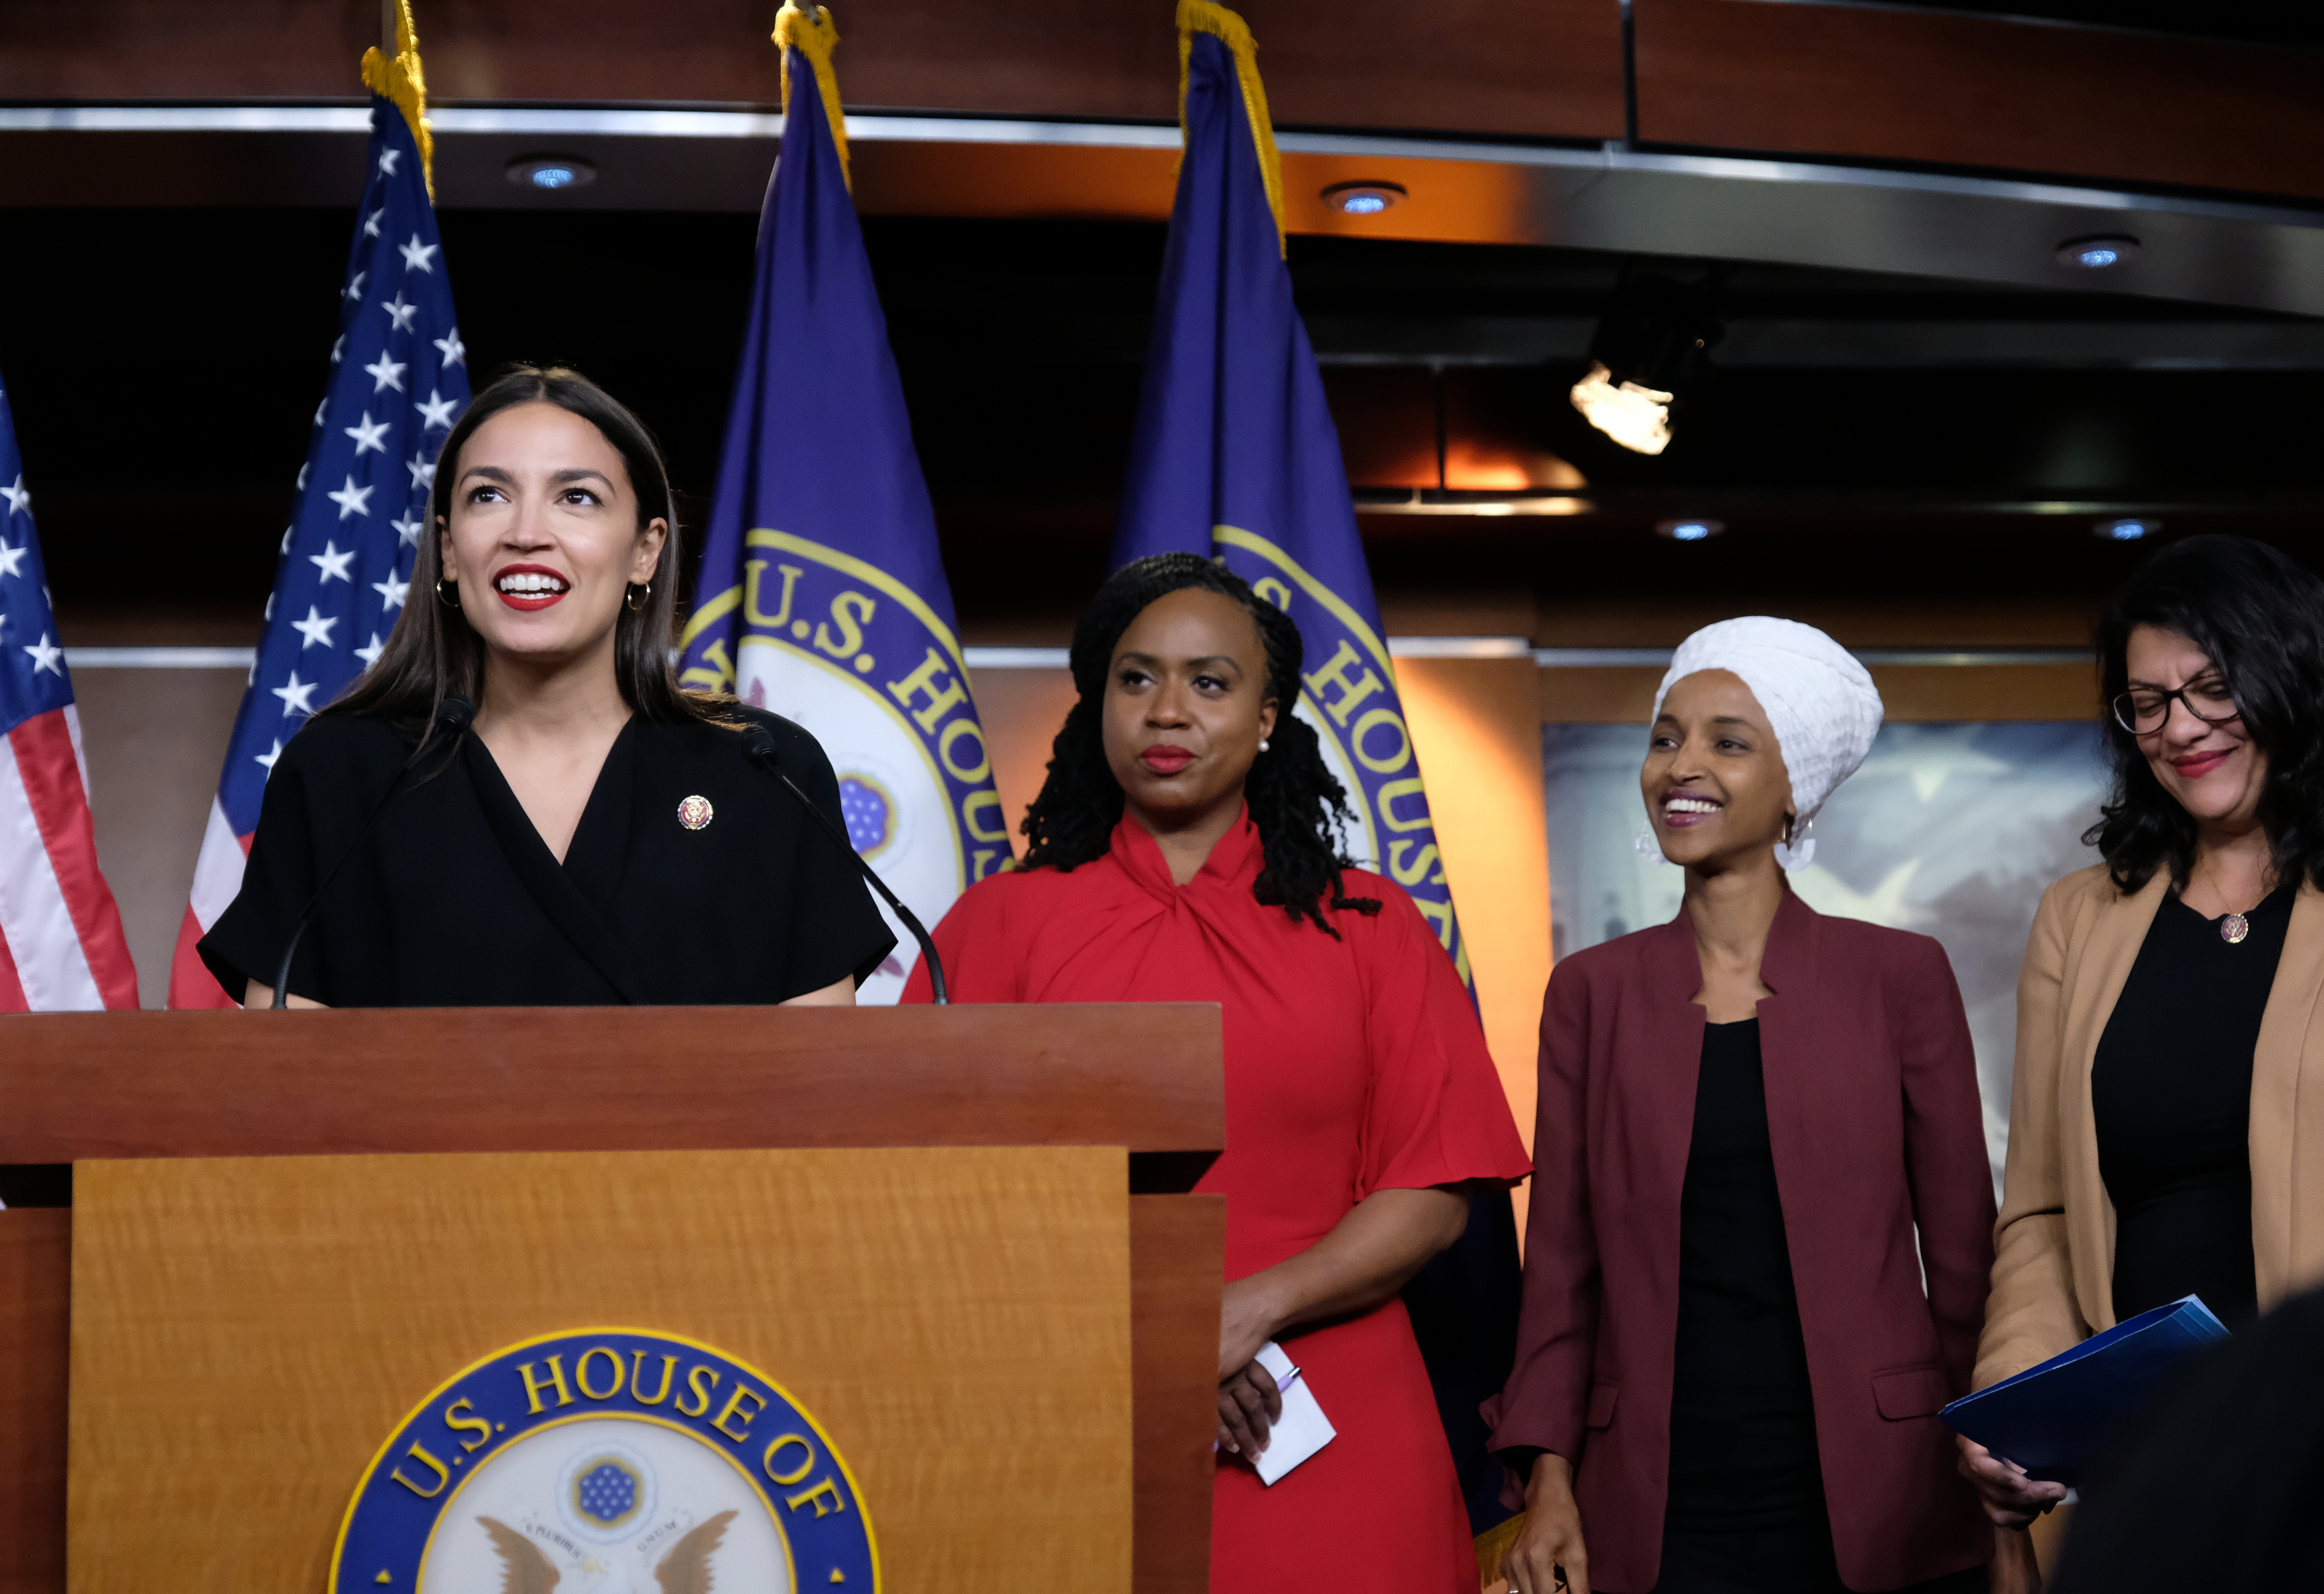 WASHINGTON, DC - JULY 15: U.S. Rep. Alexandria Ocasio-Cortez (D-NY) speaks as Reps. Ayanna Pressley (D-MA), Ilhan Omar (D-MN), and Rashida Tlaib (D-MI) listen during a press conference at the U.S. Capitol on July 15, 2019 in Washington, DC. President Donald Trump stepped up his attacks on four progressive Democratic congresswomen, saying if they're not happy in the United States "they can leave." (Alex Wroblewski/Getty Images)